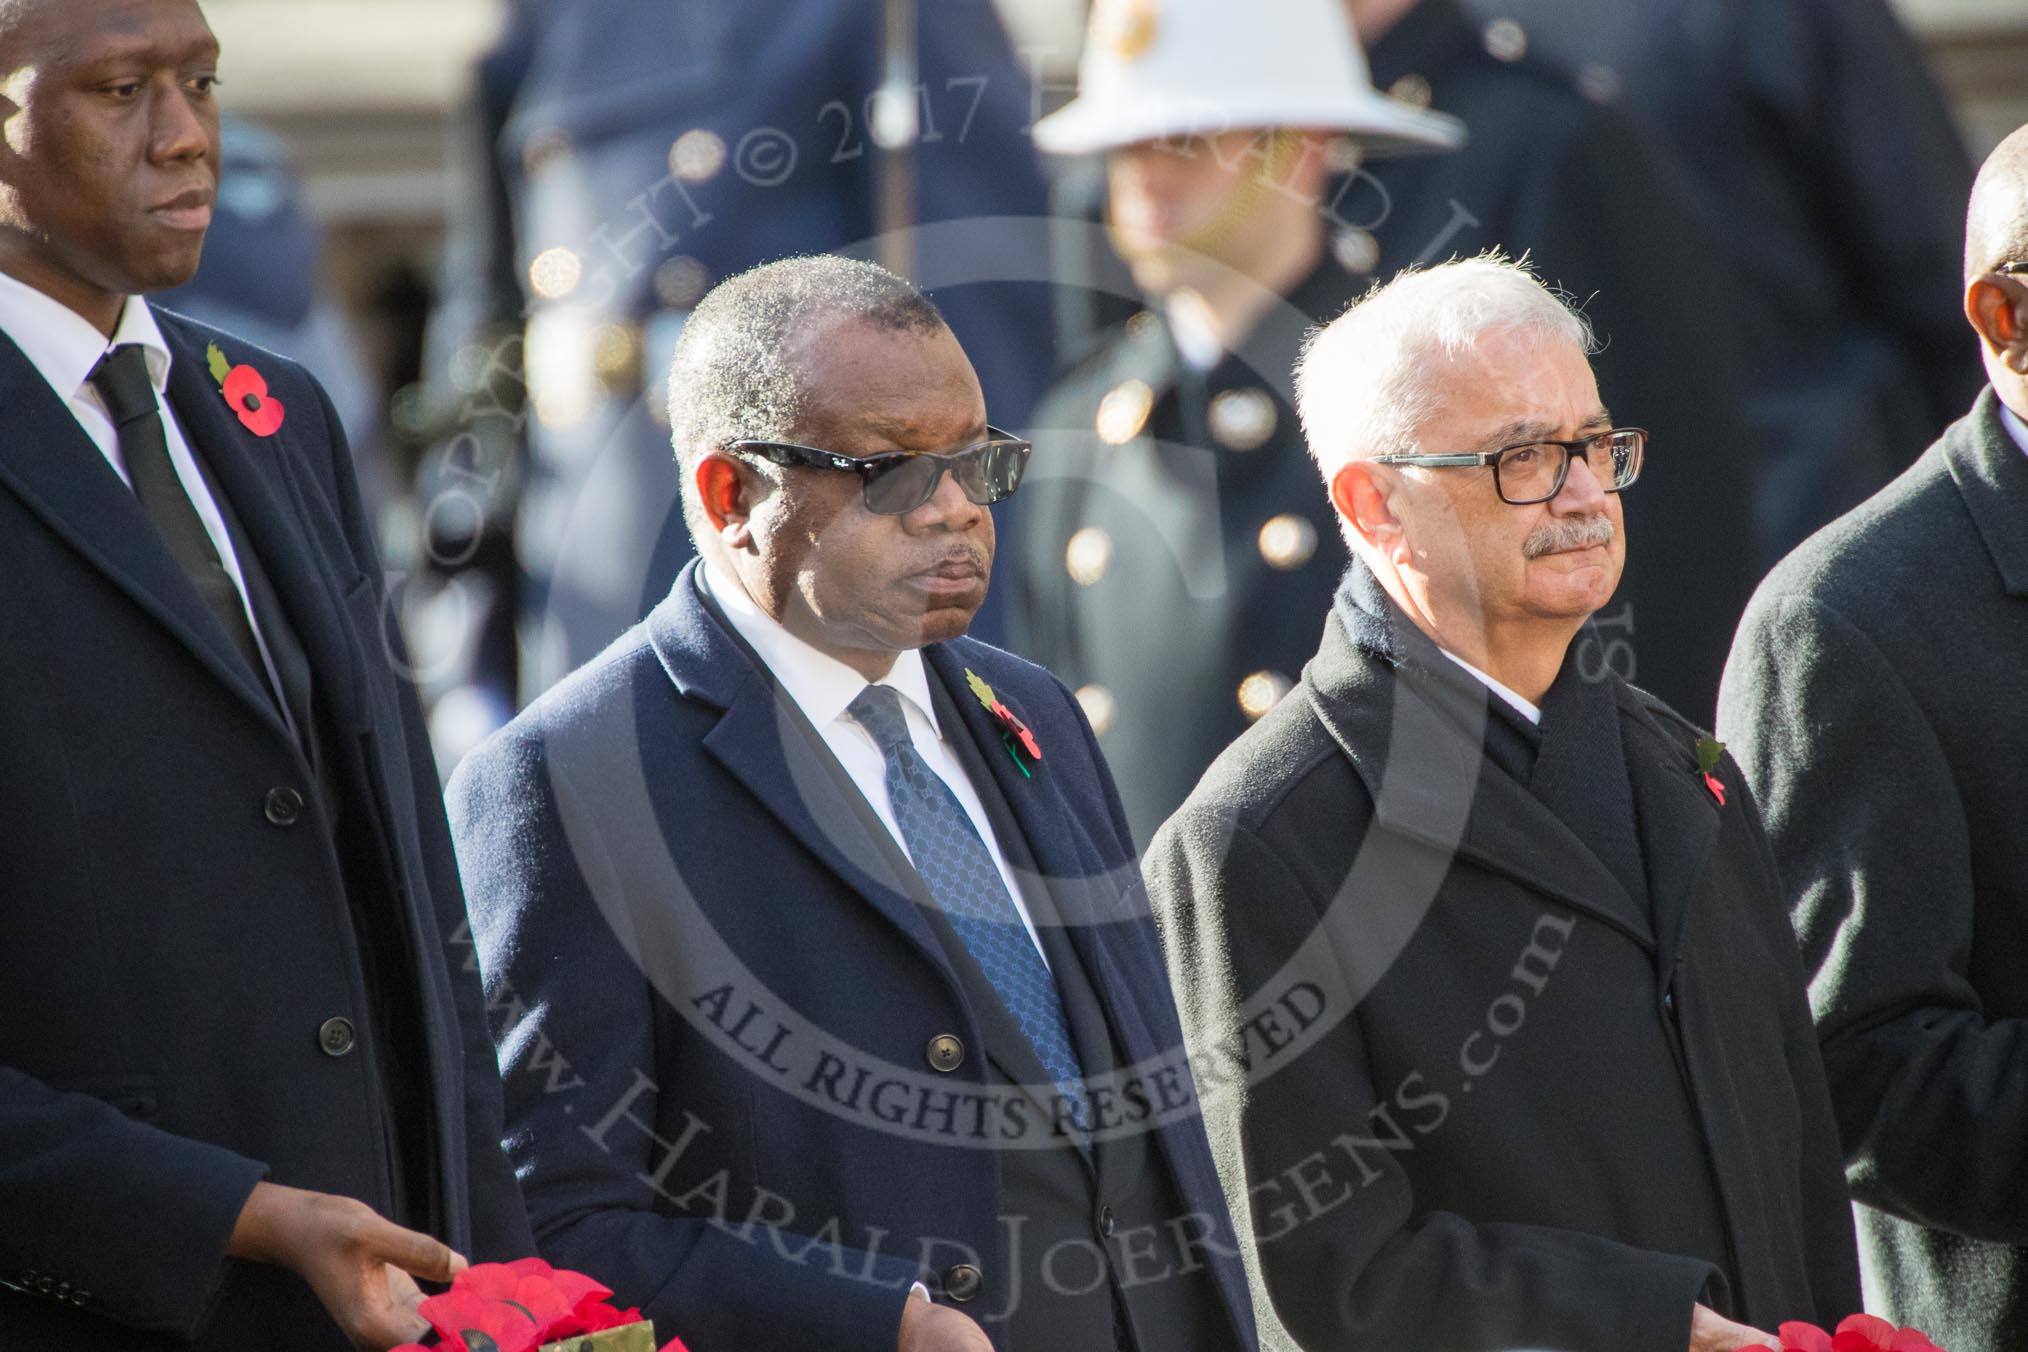 The Deputy Head of Mission of The Gambia, Mr. Kalifa Bojang, the The High Commissioner of Zambia, H.E. Muyeba Shichapwa Chikonde, and the The High Commissioner of Malta, Joseph Cole, during Remembrance Sunday Cenotaph Ceremony 2018 at Horse Guards Parade, Westminster, London, 11 November 2018, 11:04.